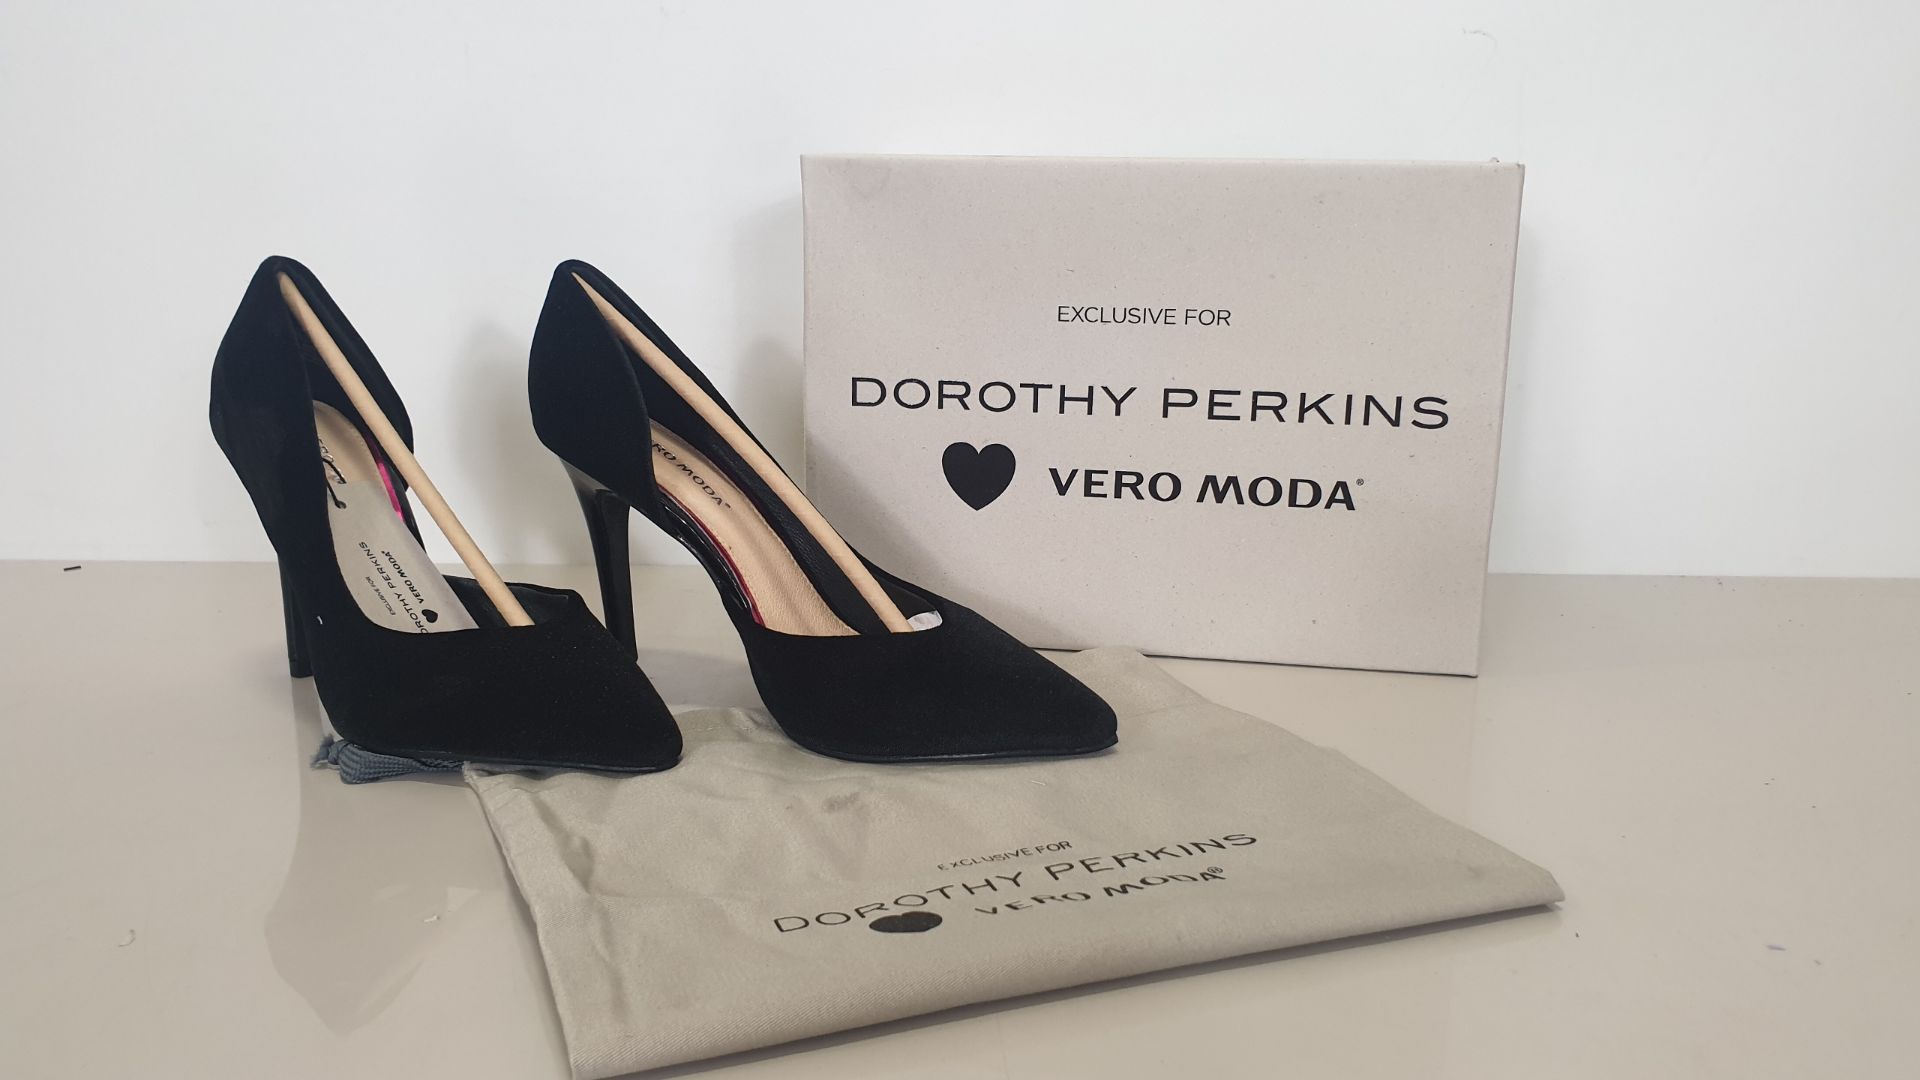 10 X BRAND NEW PAIRS OF PAIRS OF SIZE 3 DOROTHY PERKINS BLACK PIN HEEL SHOES - VERA MODA EXCLUSIVE -